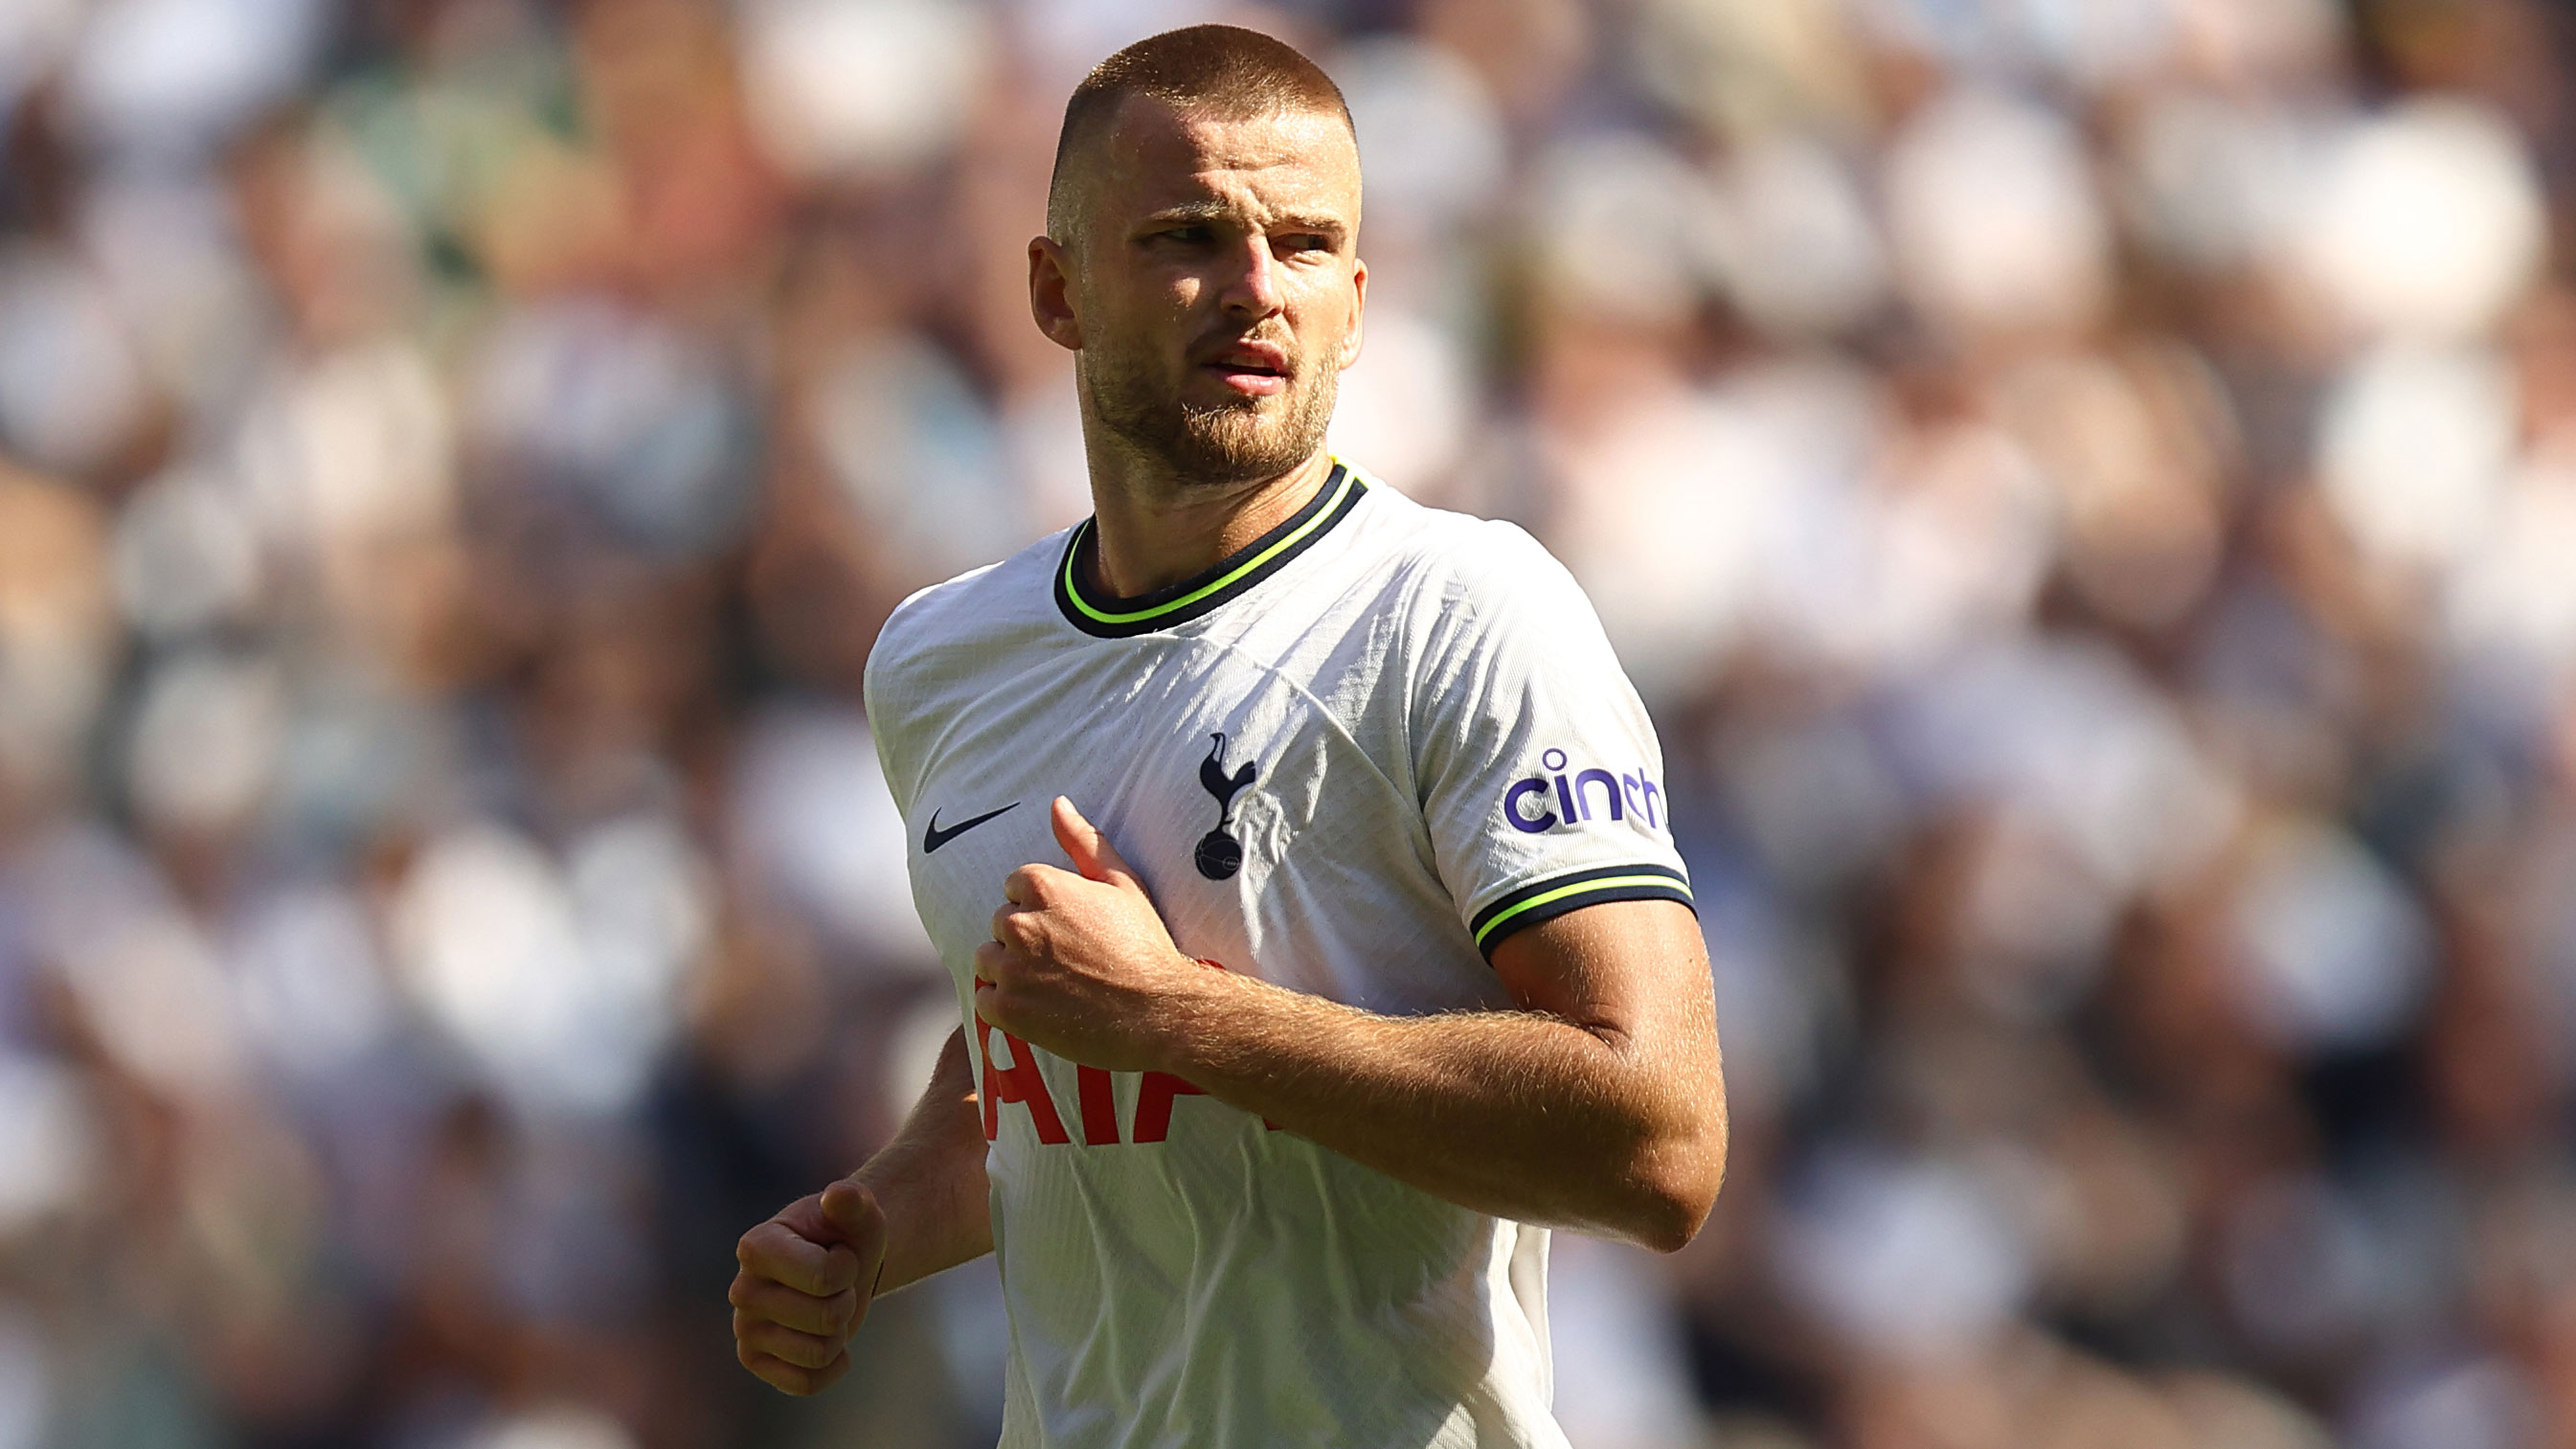 Eric Dier of Tottenham in their match against Southampton FC.